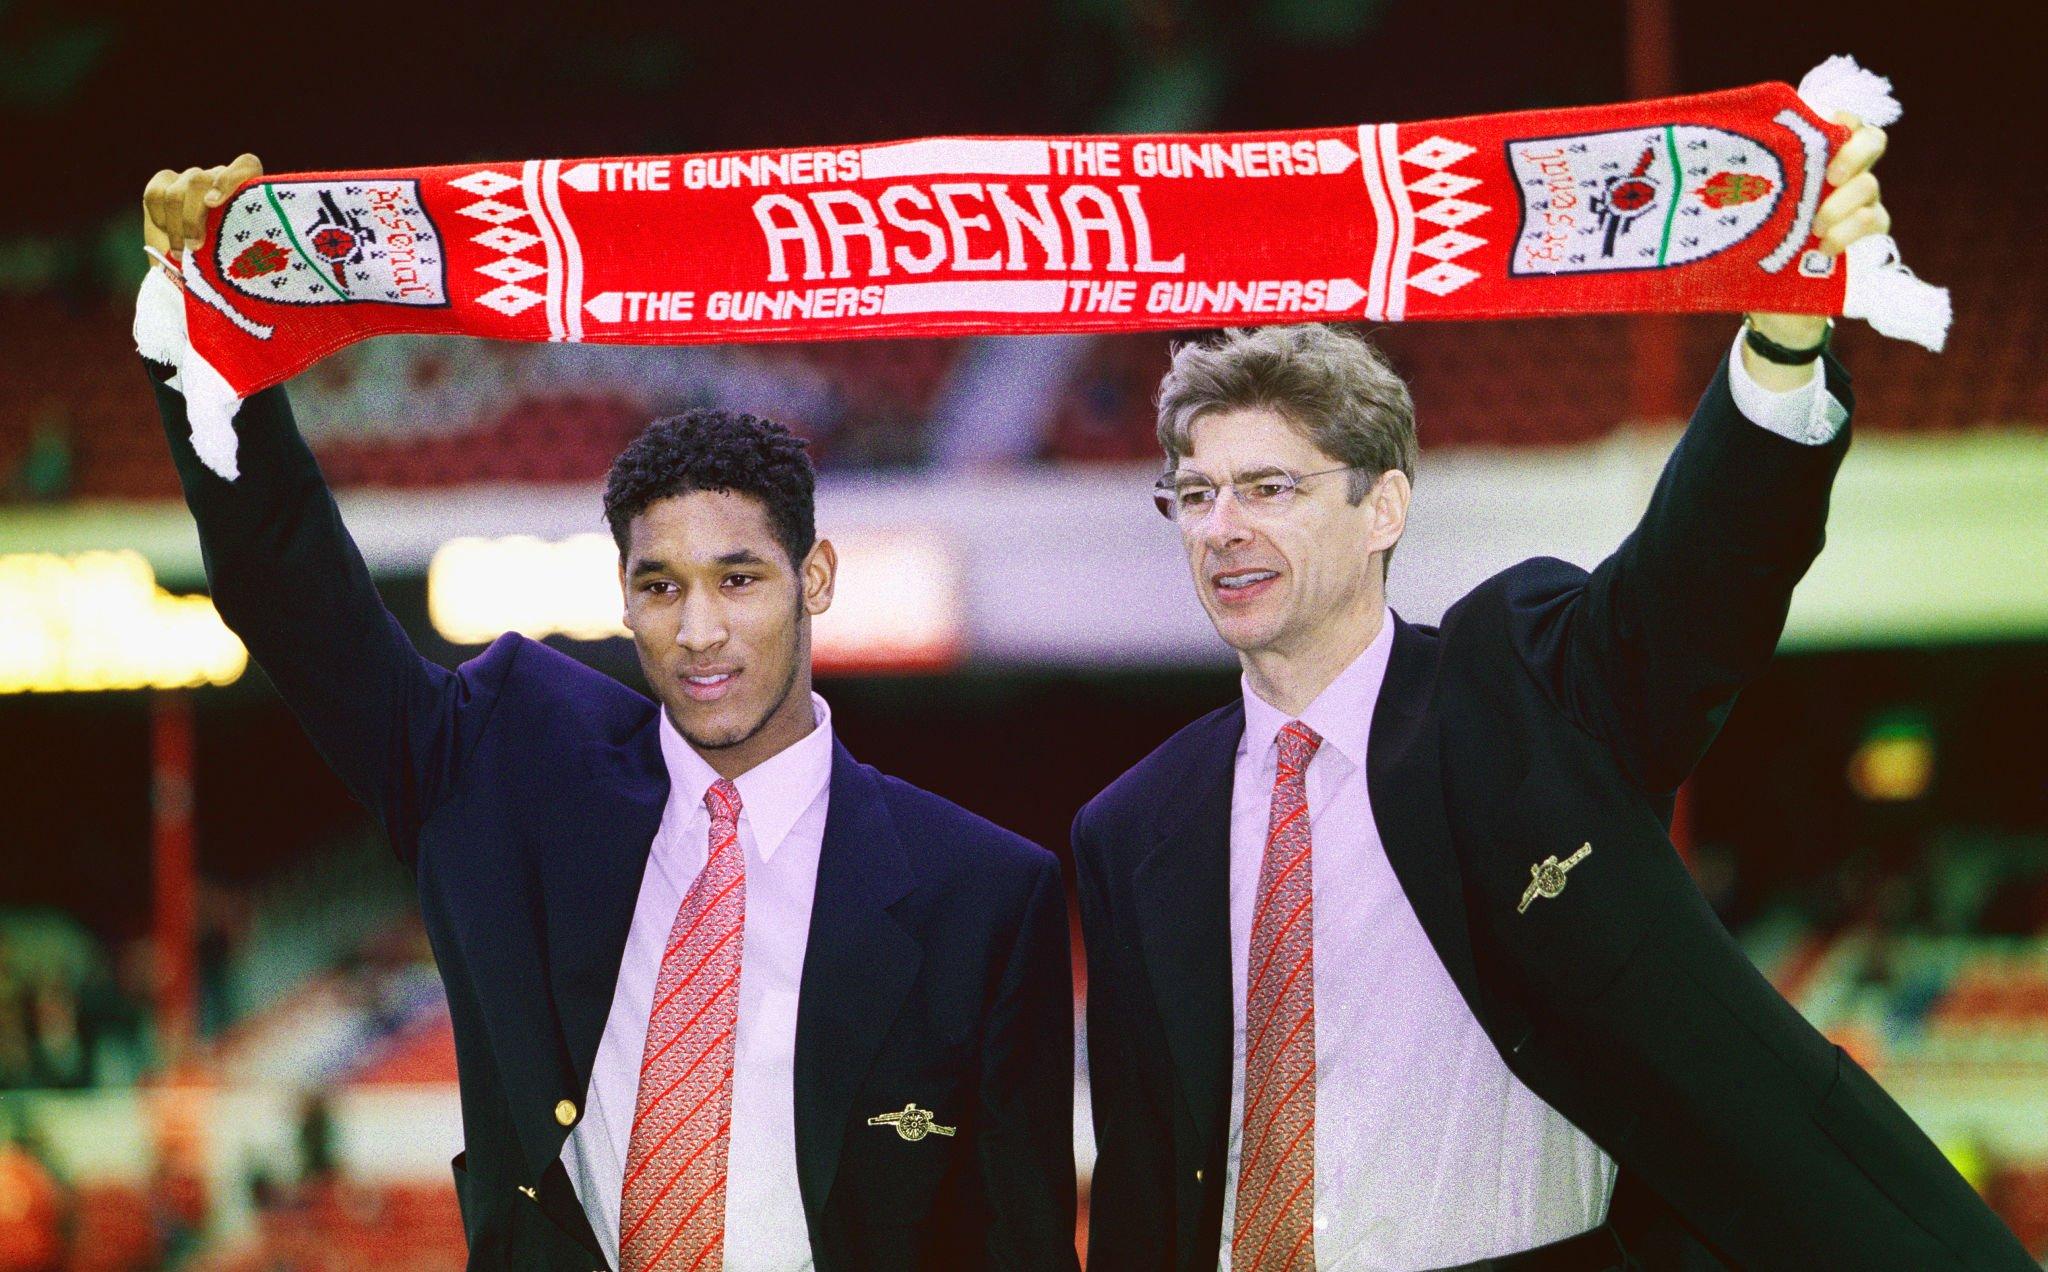 LONDON, UNITED KINGDOM - FEBRUARY 24: Arsenal manager Arsene Wenger (r) and new signing Nicolas Anelka pictured before an FA Carling Premiership match between Arsenal and Wimbledon at Highbury on February 24, 1997 in London, England. (Photo by Ben Radford/Allsport/Getty Images)